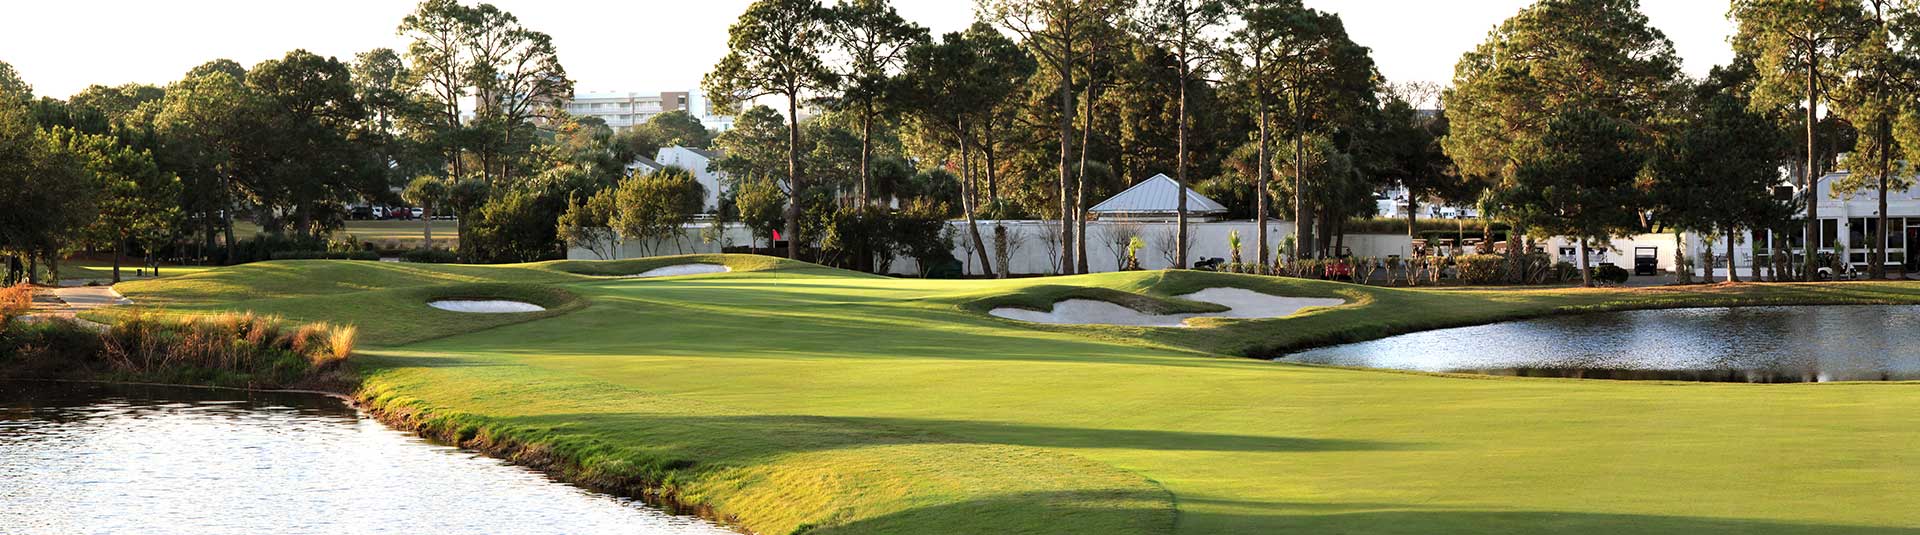 Home - Bay Point Golf Club - Nicklaus Course